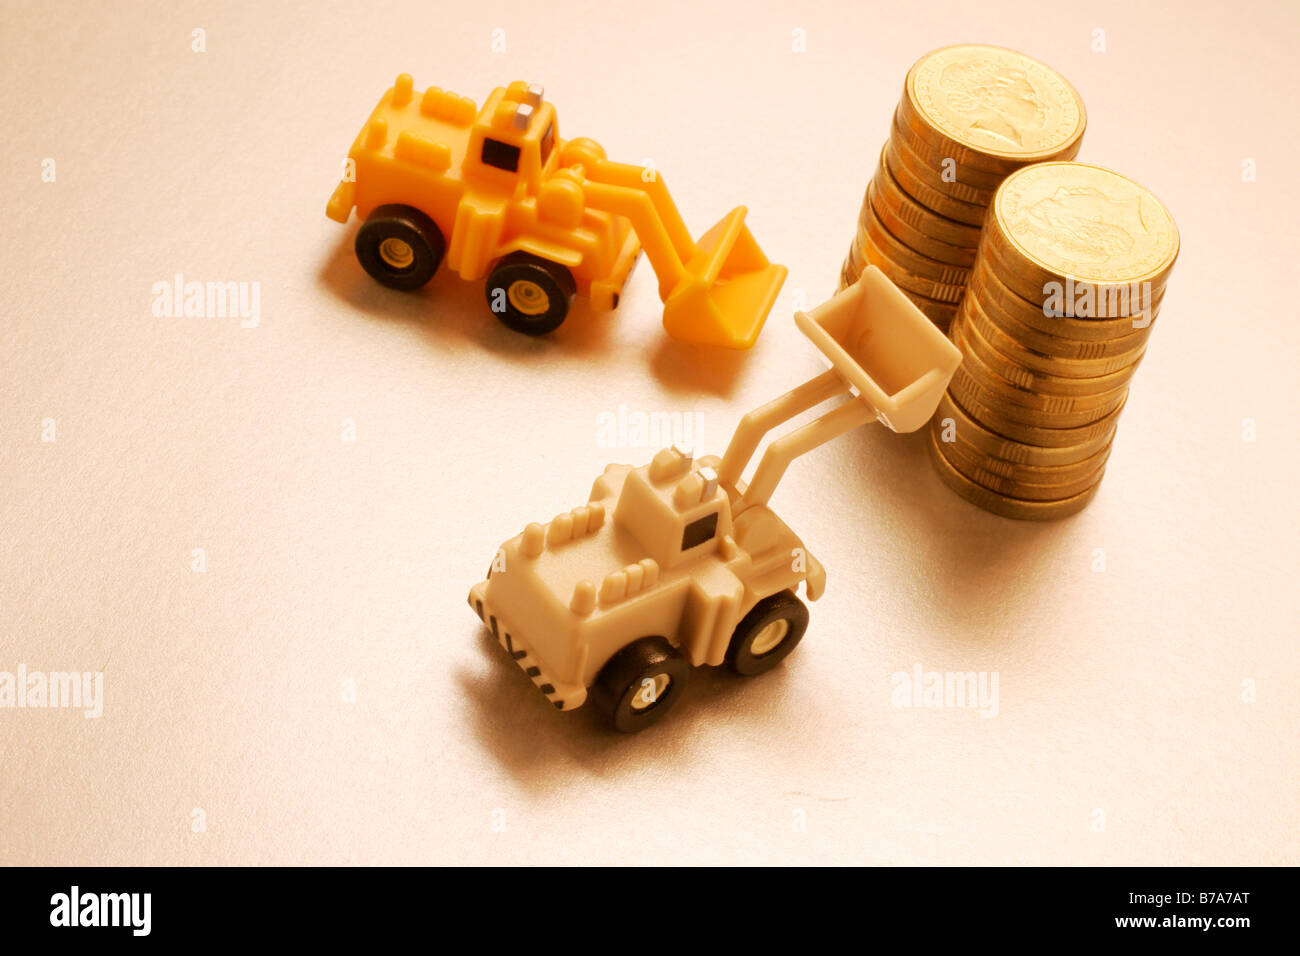 Miniature tractors and coins Stock Photo